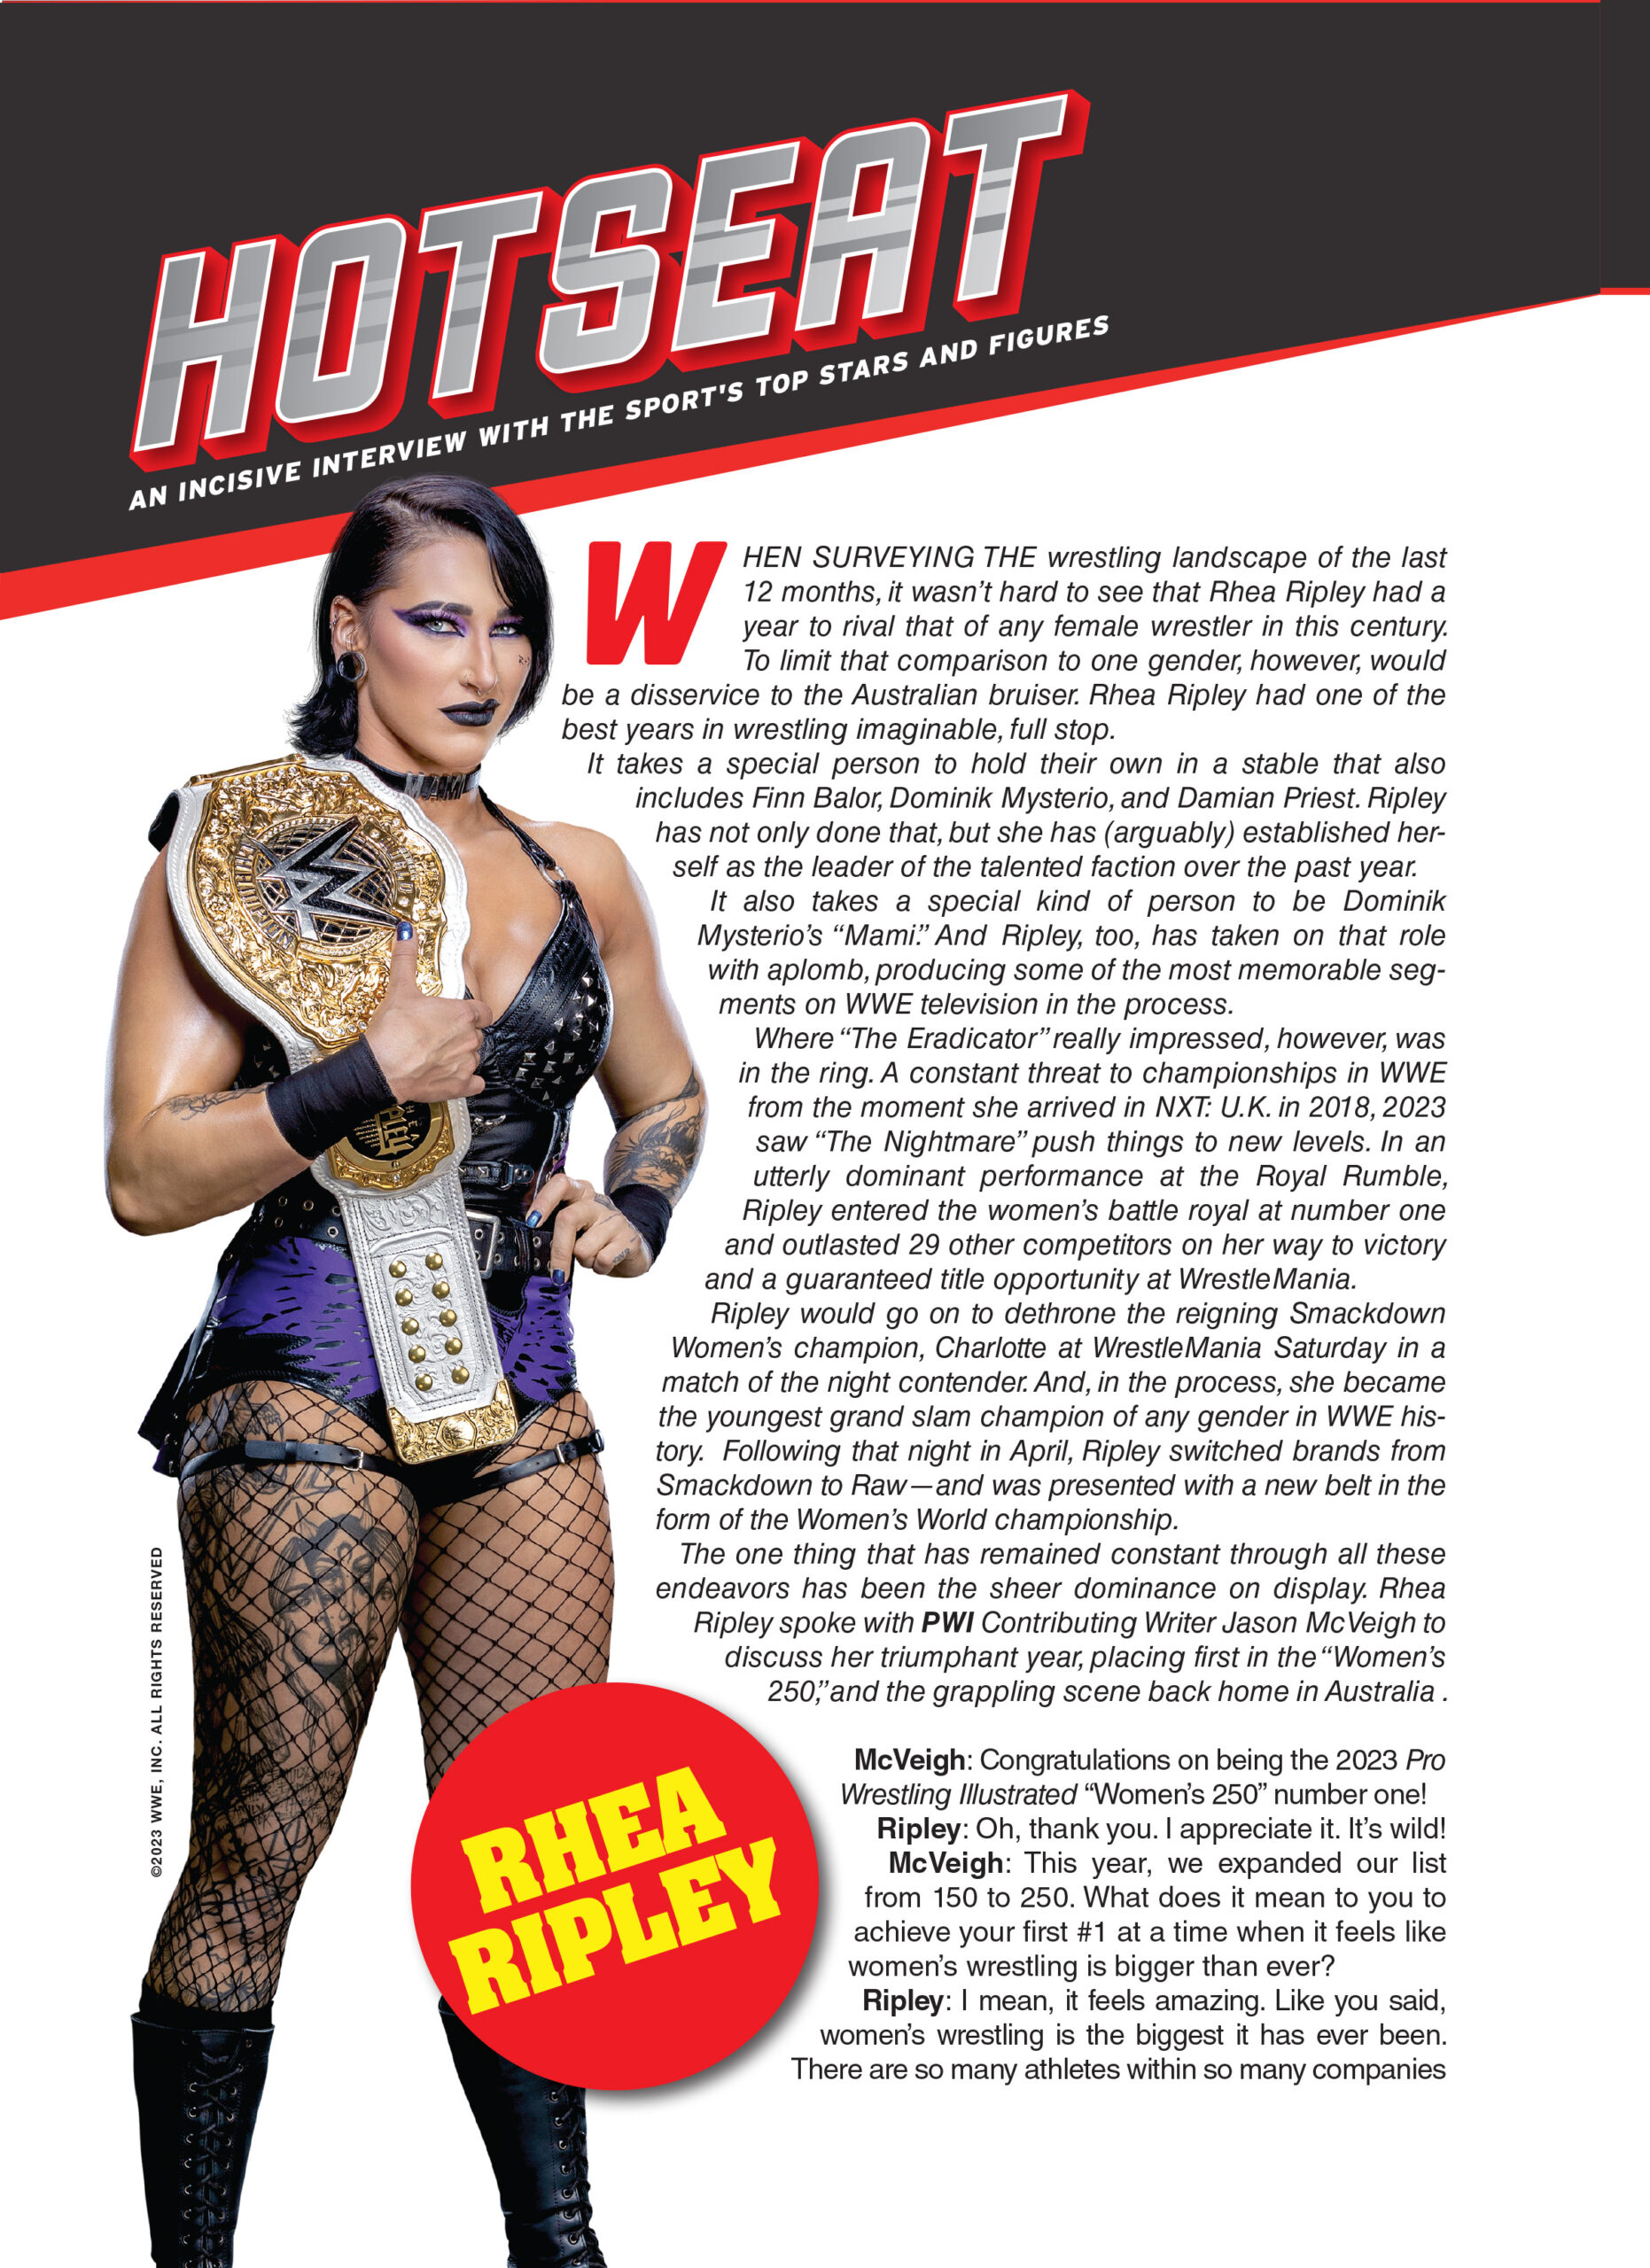 The 2023 Women’s 250 (January 2024) PWI Pro Wrestling Illustrated